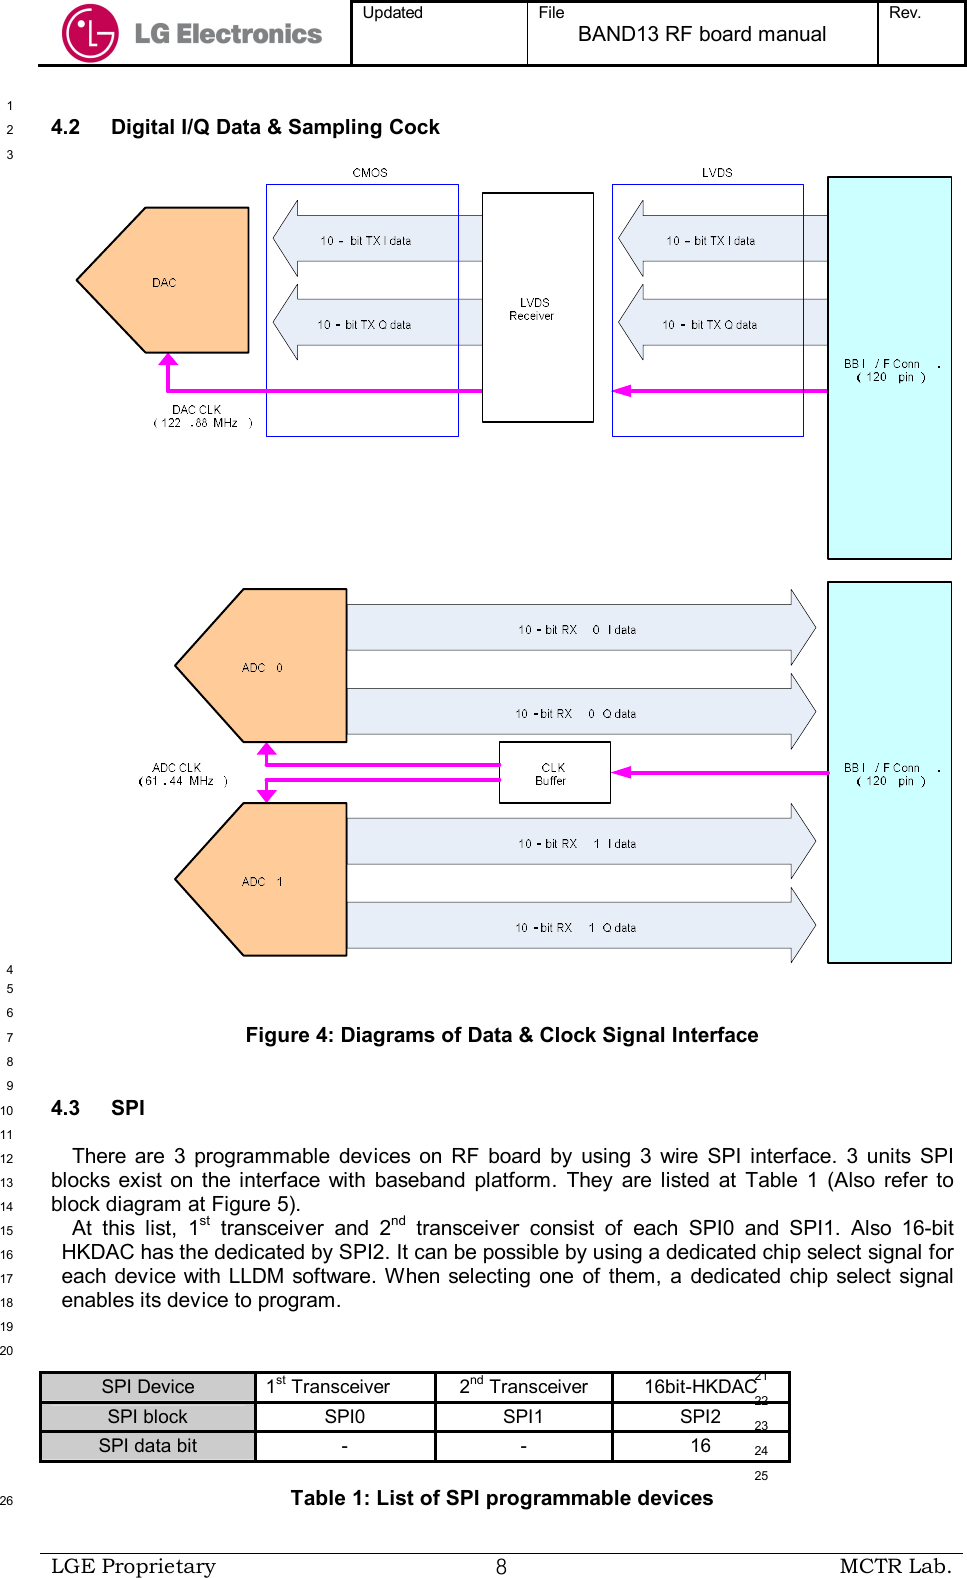  Updated  File BAND13 RF board manual Rev.    LGE Proprietary  ８ MCTR Lab.   1 4.2  Digital I/Q Data &amp; Sampling Cock 2  3 4  5  6 Figure 4: Diagrams of Data &amp; Clock Signal Interface 7  8  9 4.3  SPI 10  11 There are  3  programmable  devices  on  RF  board  by  using  3  wire  SPI  interface.  3  units  SPI 12 blocks exist  on  the interface with  baseband  platform.  They  are  listed  at  Table  1  (Also  refer  to 13 block diagram at Figure 5). 14 At  this  list,  1st  transceiver  and  2nd  transceiver  consist  of  each  SPI0  and  SPI1.  Also  16-bit 15 HKDAC has the dedicated by SPI2. It can be possible by using a dedicated chip select signal for 16 each device with LLDM  software. When selecting  one  of  them,  a  dedicated chip  select  signal 17 enables its device to program.  18  19  20  21  22  23  24  25 Table 1: List of SPI programmable devices 26 SPI Device  1st Transceiver  2nd Transceiver  16bit-HKDAC SPI block  SPI0  SPI1  SPI2 SPI data bit  -  -  16 